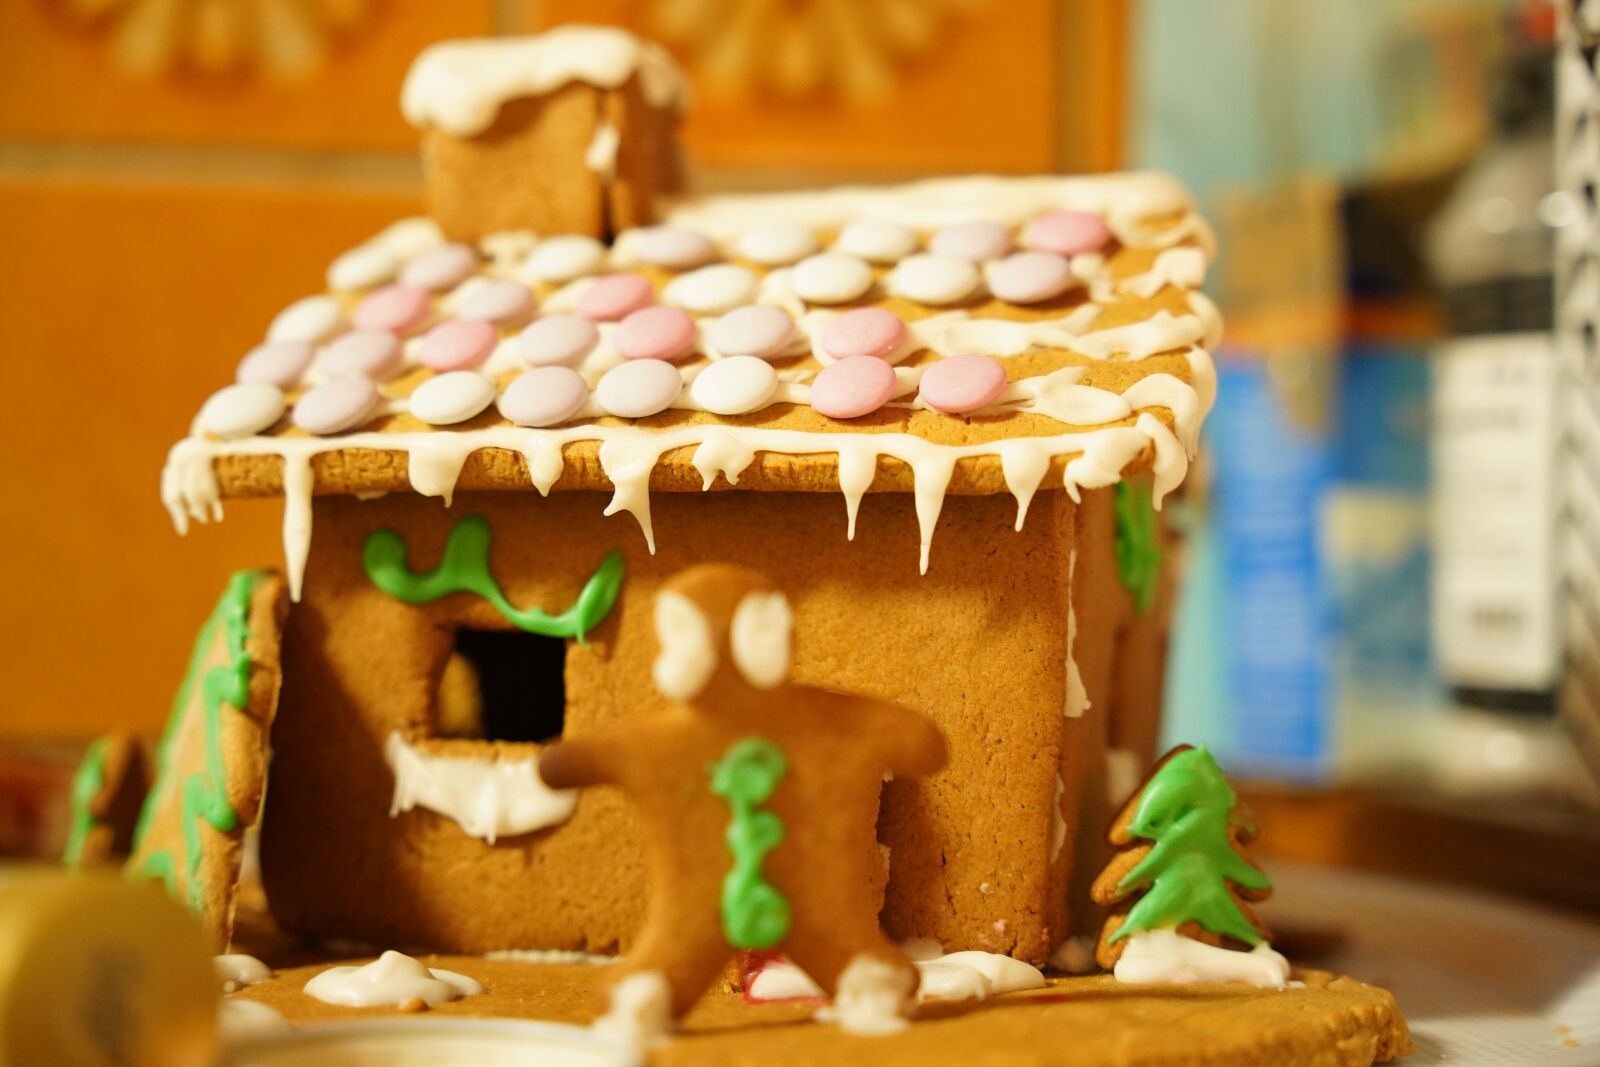 Sony a7R III sample photo. The gingerbread house photography